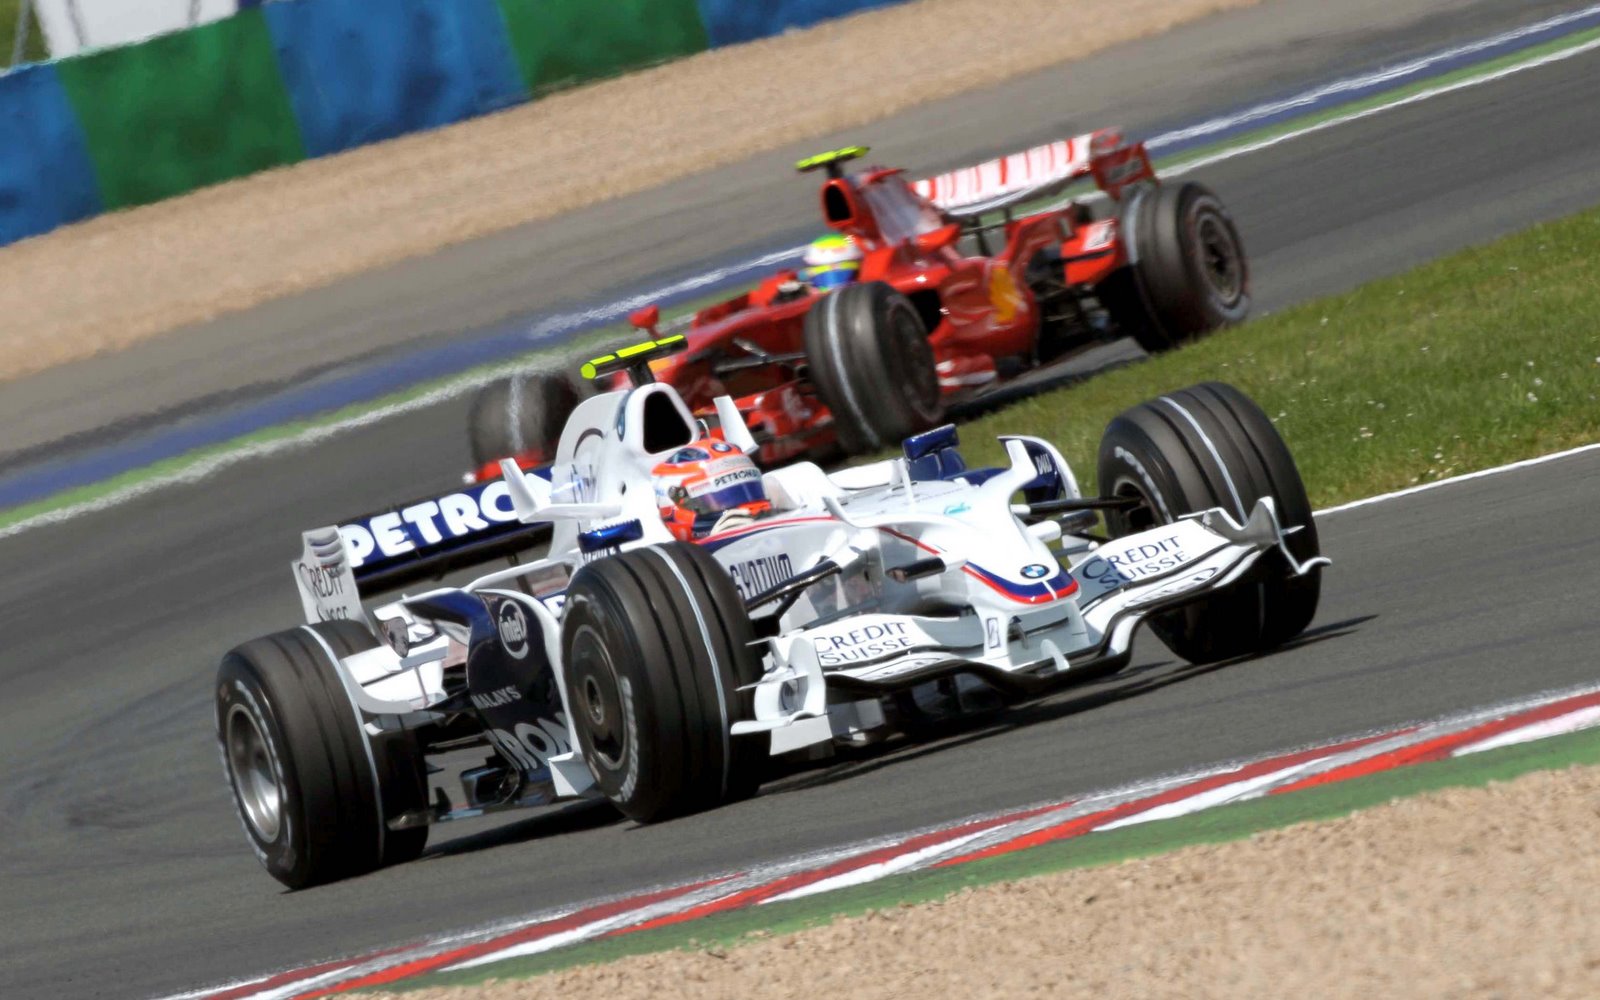 [Robert+Kubica+BMW+Sauber+Friday+Free+Practise+France+Magny+Cours+F1+2008+26.jpg]